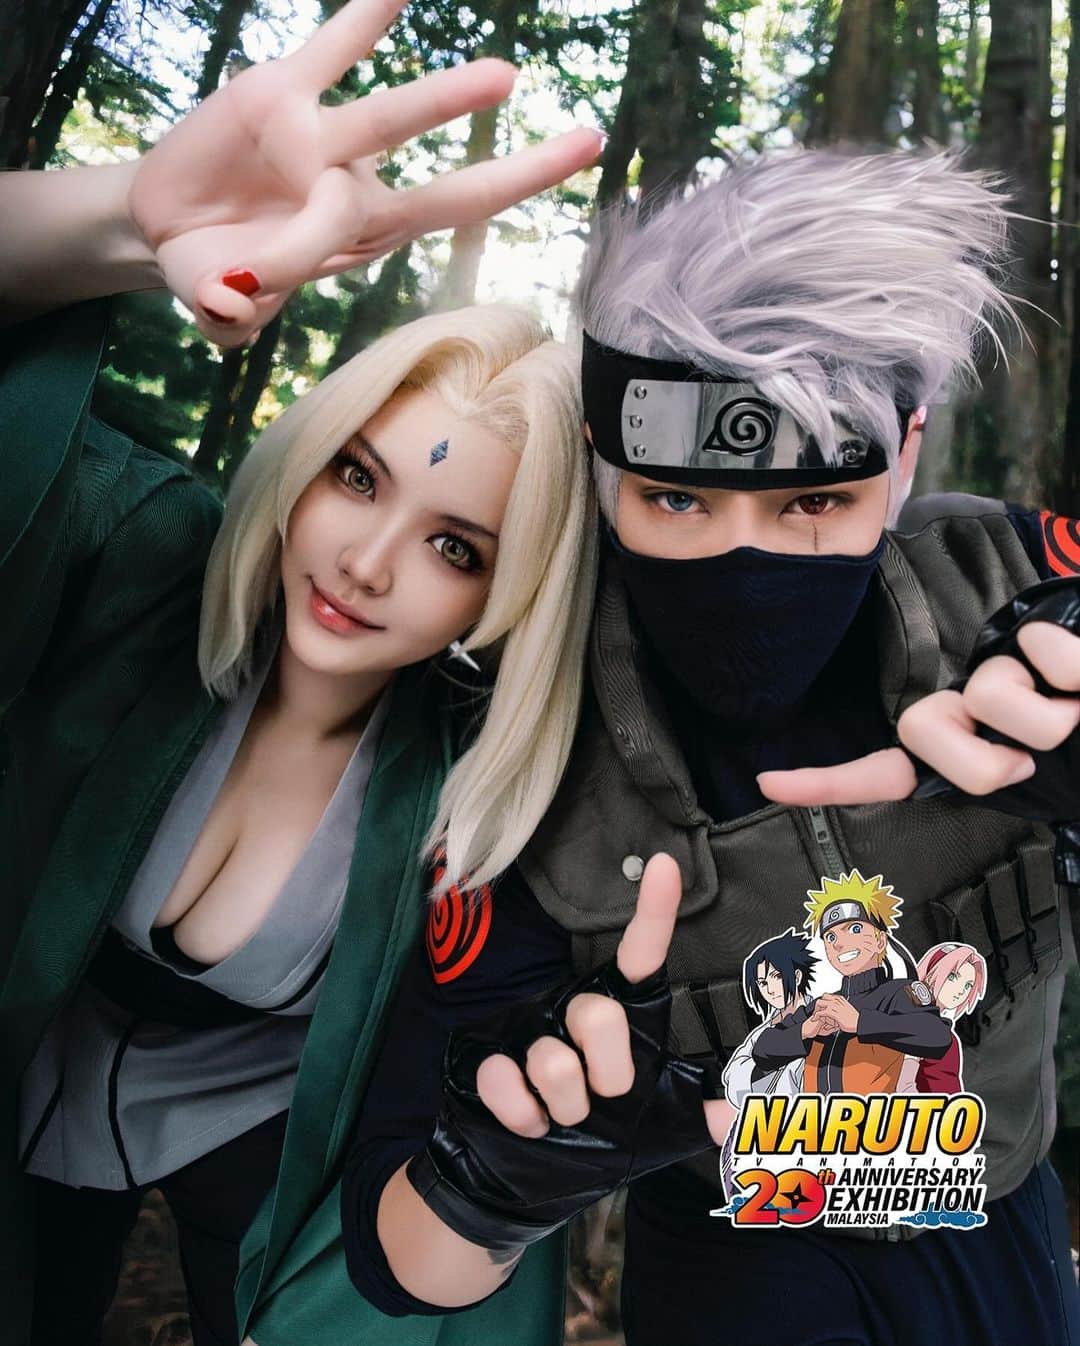 YingTzeのインスタグラム：「📢🎁🎁Naruto fans! We're super excited to share that we'll be at the NARUTO TV Animation 20th Anniversary Exhibition. Imagine stepping into the world we've all loved for years! Now, how about joining us together on the first day of the exhibition (7 Oct 2023)?  Yes, YOU could get a launch day ticket to this incredible exhibition! How? Just follow these steps!  1. Follow @yingtze @prestonles.ig & @cosmic_asia on Instagram 2. Tag 2 people in the comments below with hashtag #NARUTOExhibitionMY (𝐓𝐡𝐞 𝐦𝐨𝐫𝐞 𝐲𝐨𝐮 𝐩𝐚𝐫𝐭𝐢𝐜𝐢𝐩𝐚𝐭𝐞, 𝐭𝐡𝐞 𝐛𝐞𝐭𝐭𝐞𝐫 𝐲𝐨𝐮𝐫 𝐜𝐡𝐚𝐧𝐜𝐞𝐬 𝐨𝐟 𝐰𝐢𝐧𝐧𝐢𝐧𝐠) 3. Share this post on your IG story and tag @cosmic_asia (make sure your account is set to public) Get your ninja game on! The Naruto exhibition awaits. Share the excitement and spread the ninja way.  Get your Early Bird Ticket at BookMyShow now!  🔗https://my.bookmyshow.com/e/N20EXMYS Dattebayo!  *Terms & Conditions Apply*」